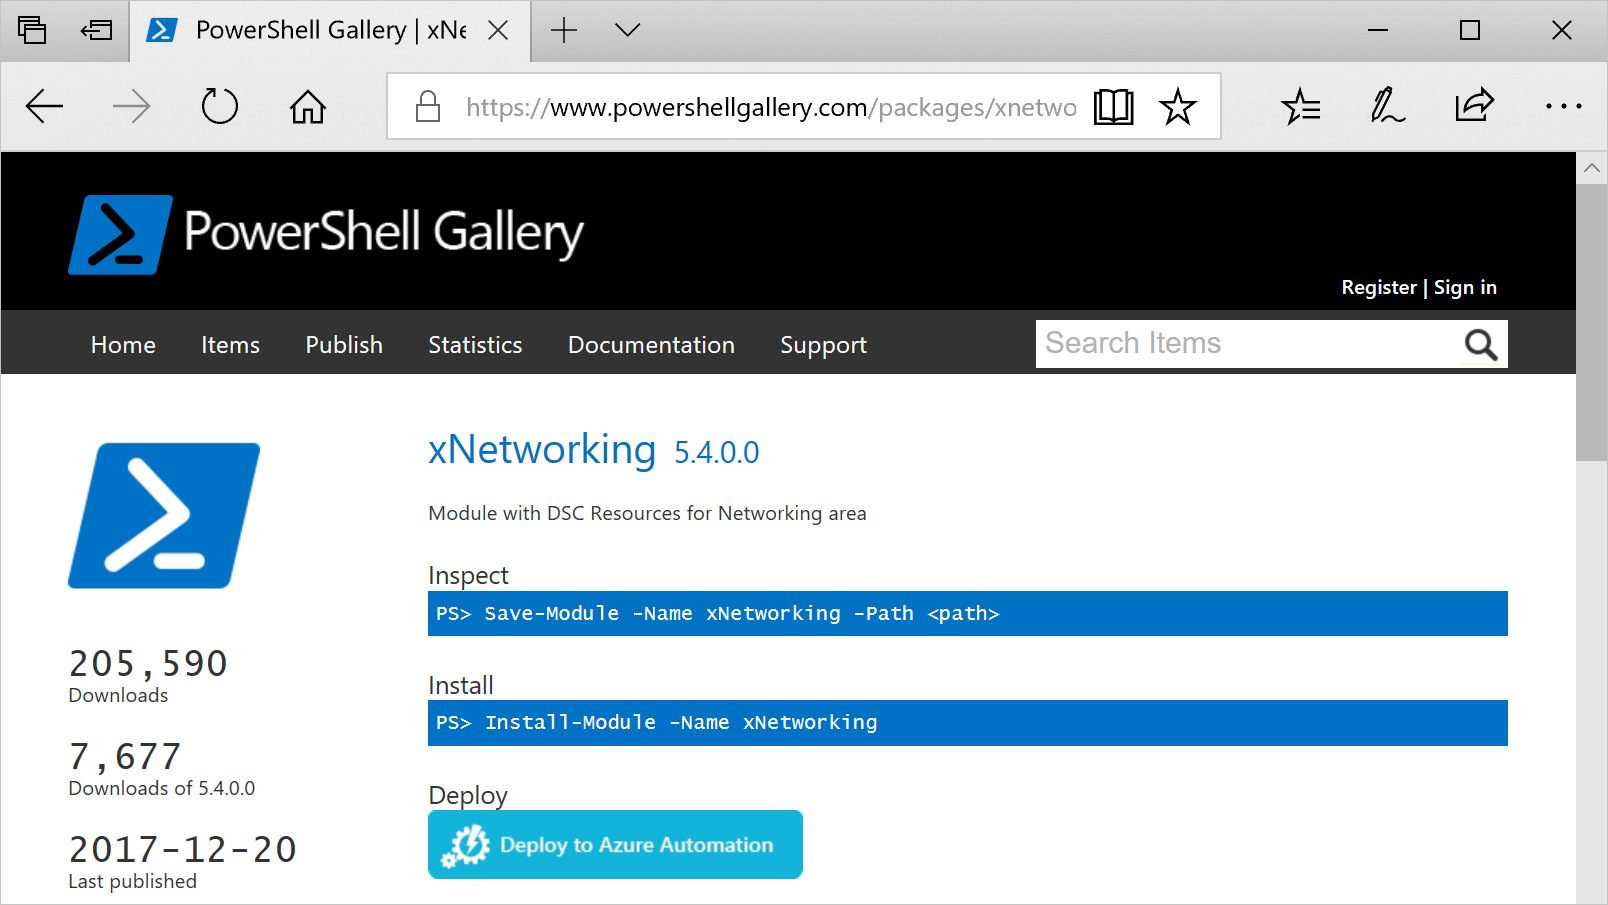 PowerShell Gallery example